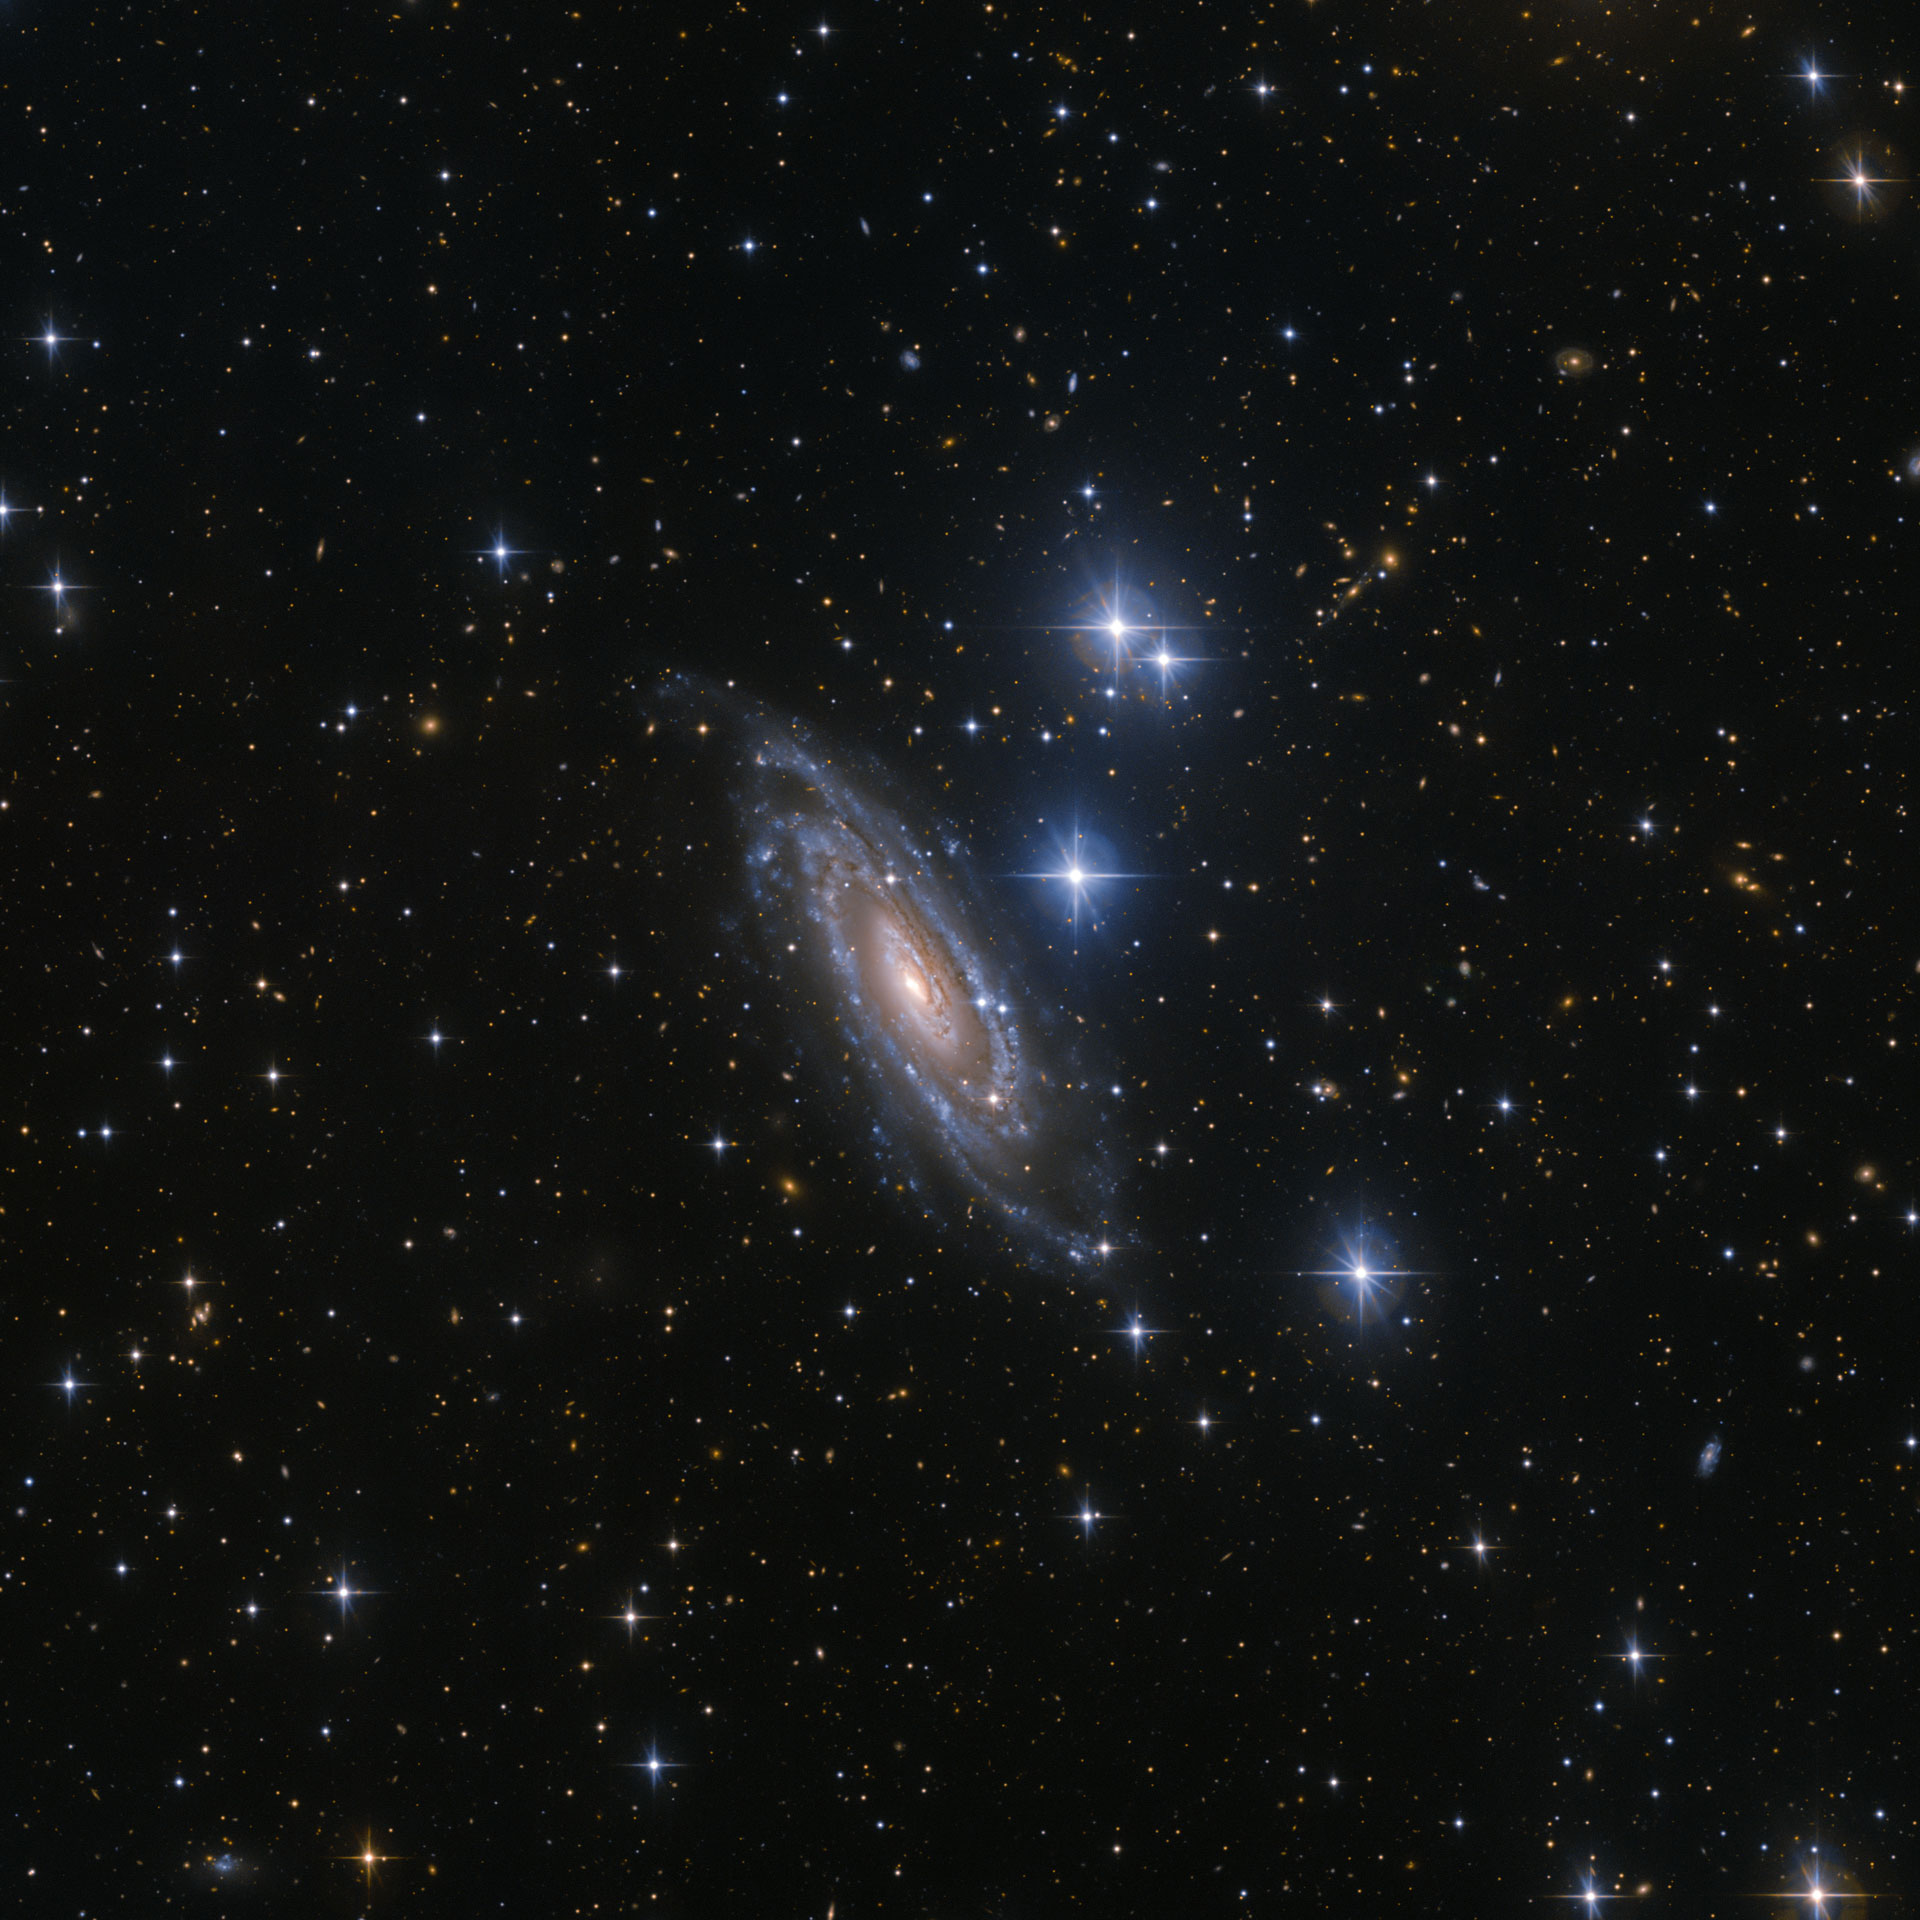 New ESO Image of Spiral Galaxy NGC 1964